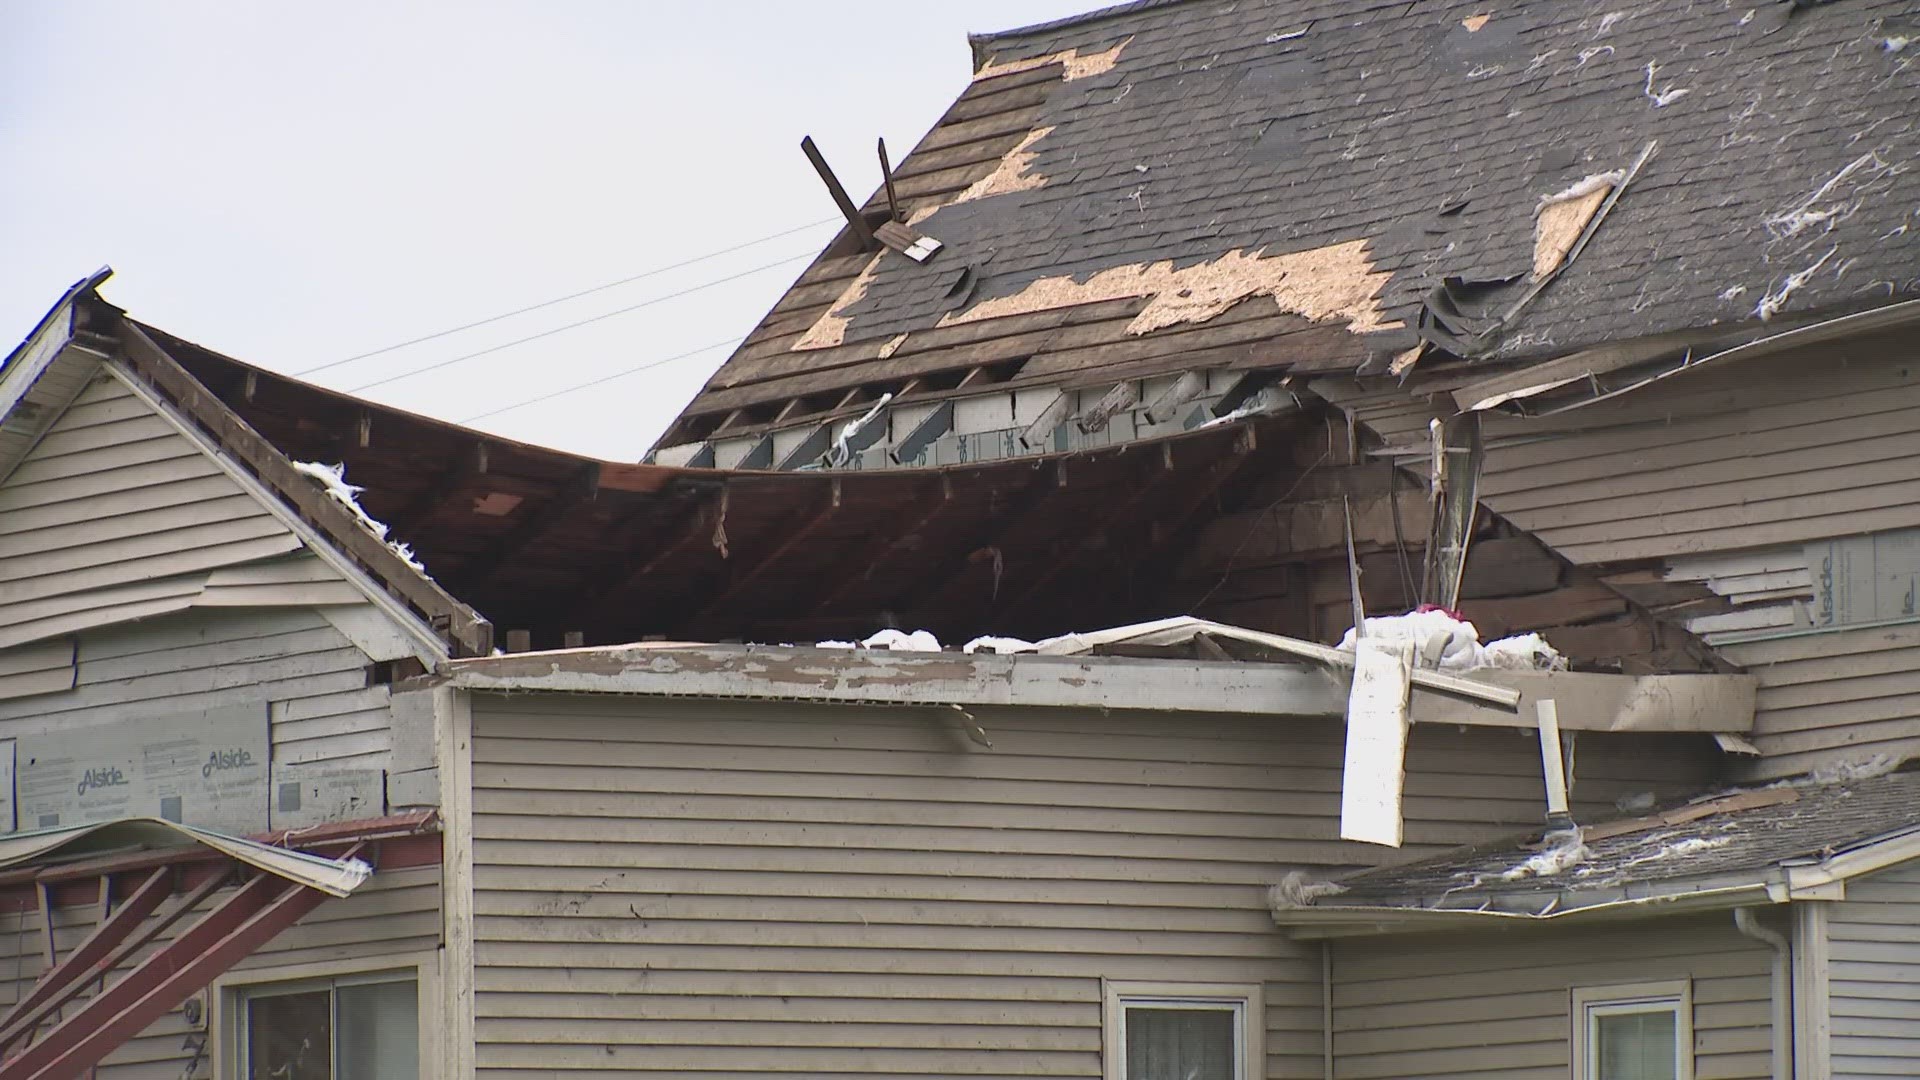 Fund payments will be given to Windham residents who go through an application process. No one was injured in the EF-1 tornado, but several houses were destroyed.